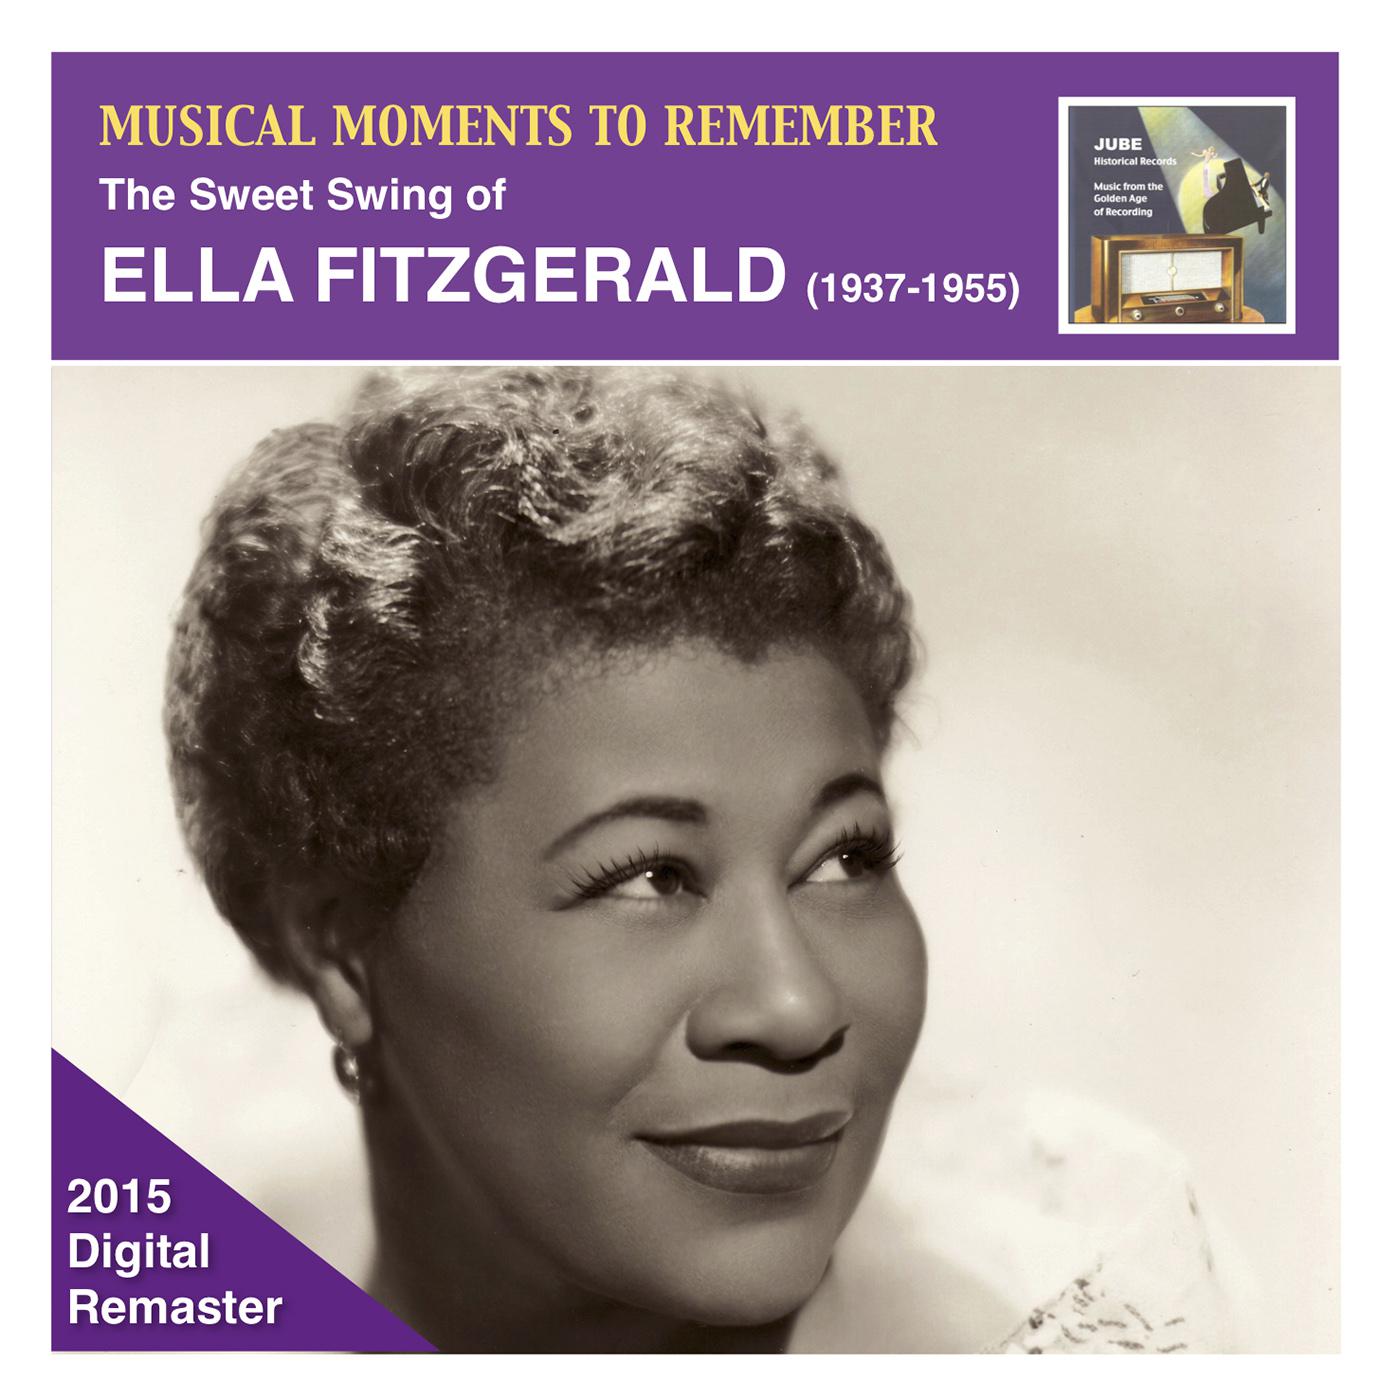 MUSICAL MOMENTS TO REMEMBER - Ella Fitzgerald (1937-1955)